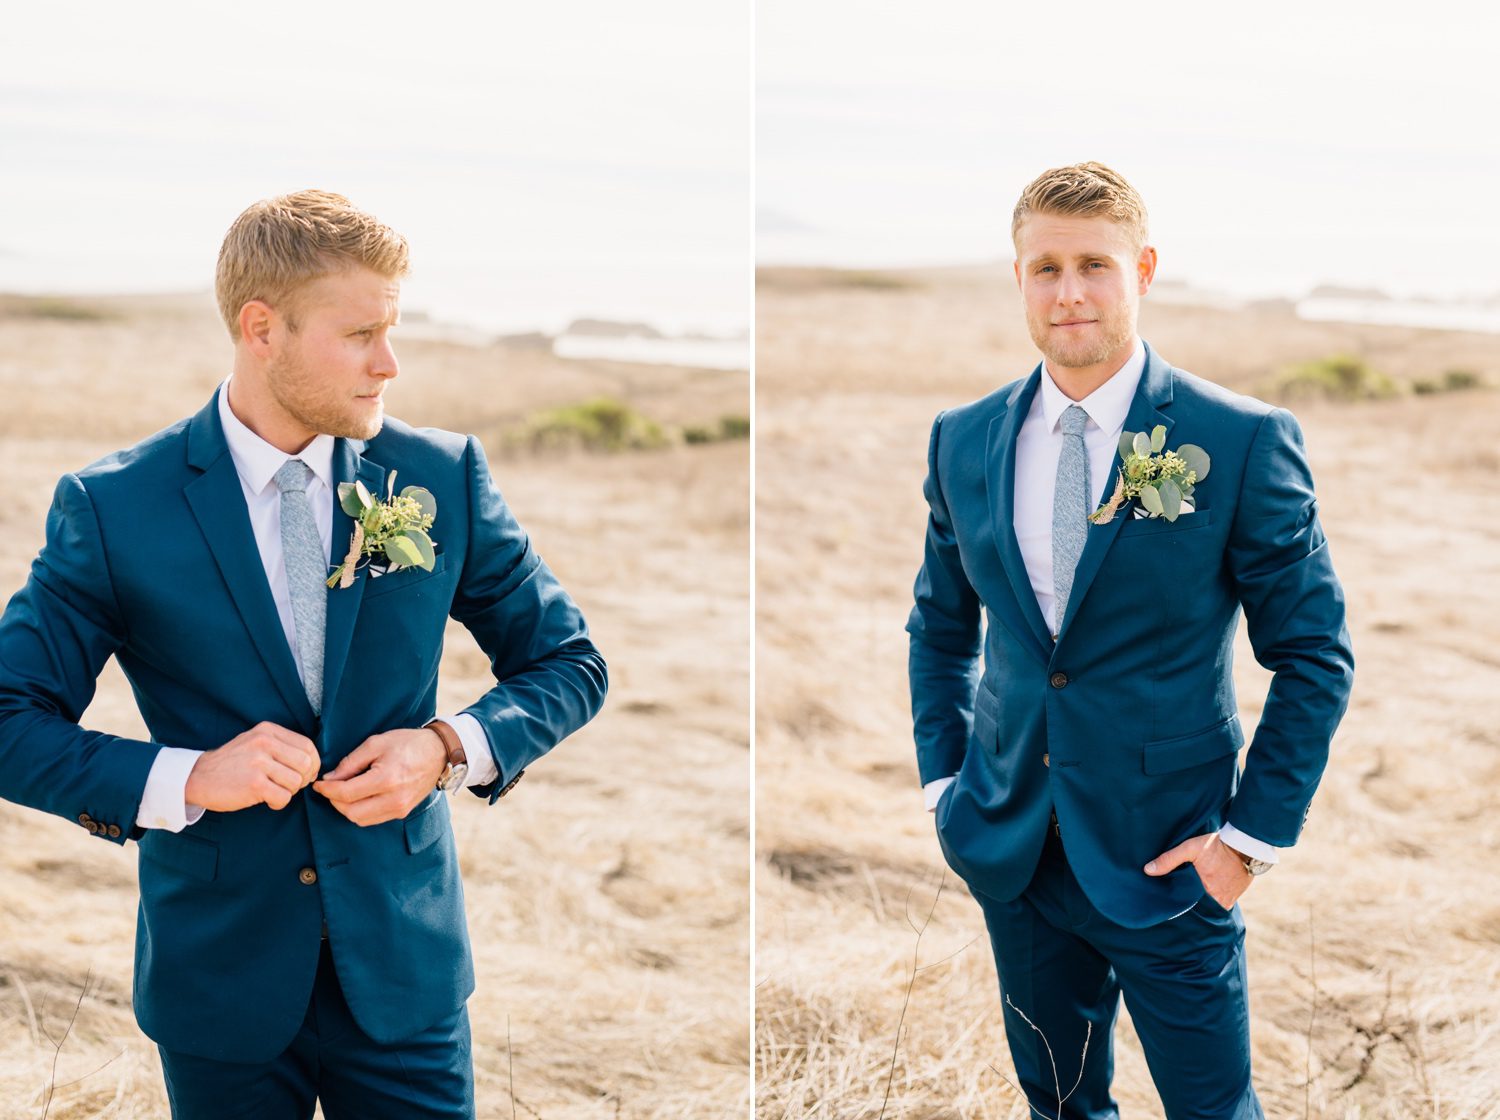 Groom Buttoning up his suit